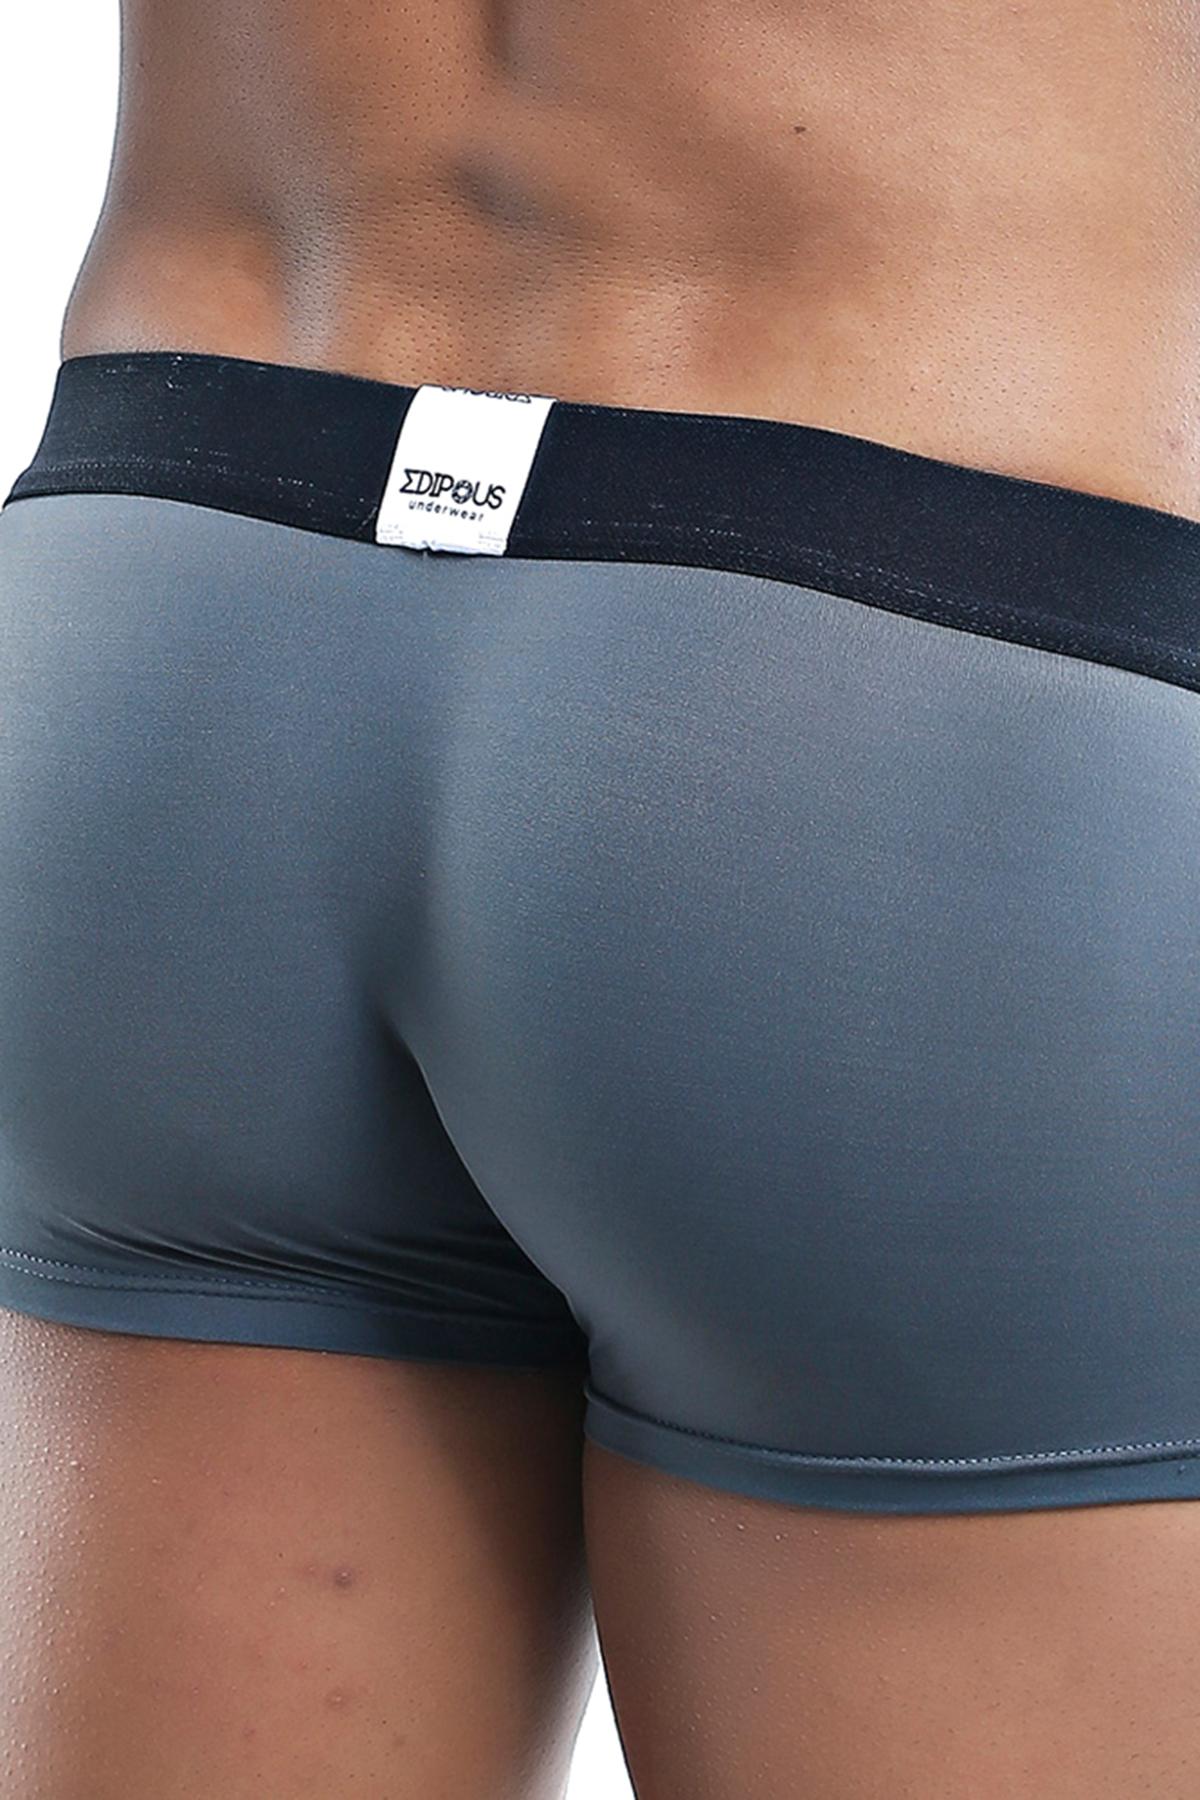 Edipous Grey/Grey Contrast Pouch Trunk